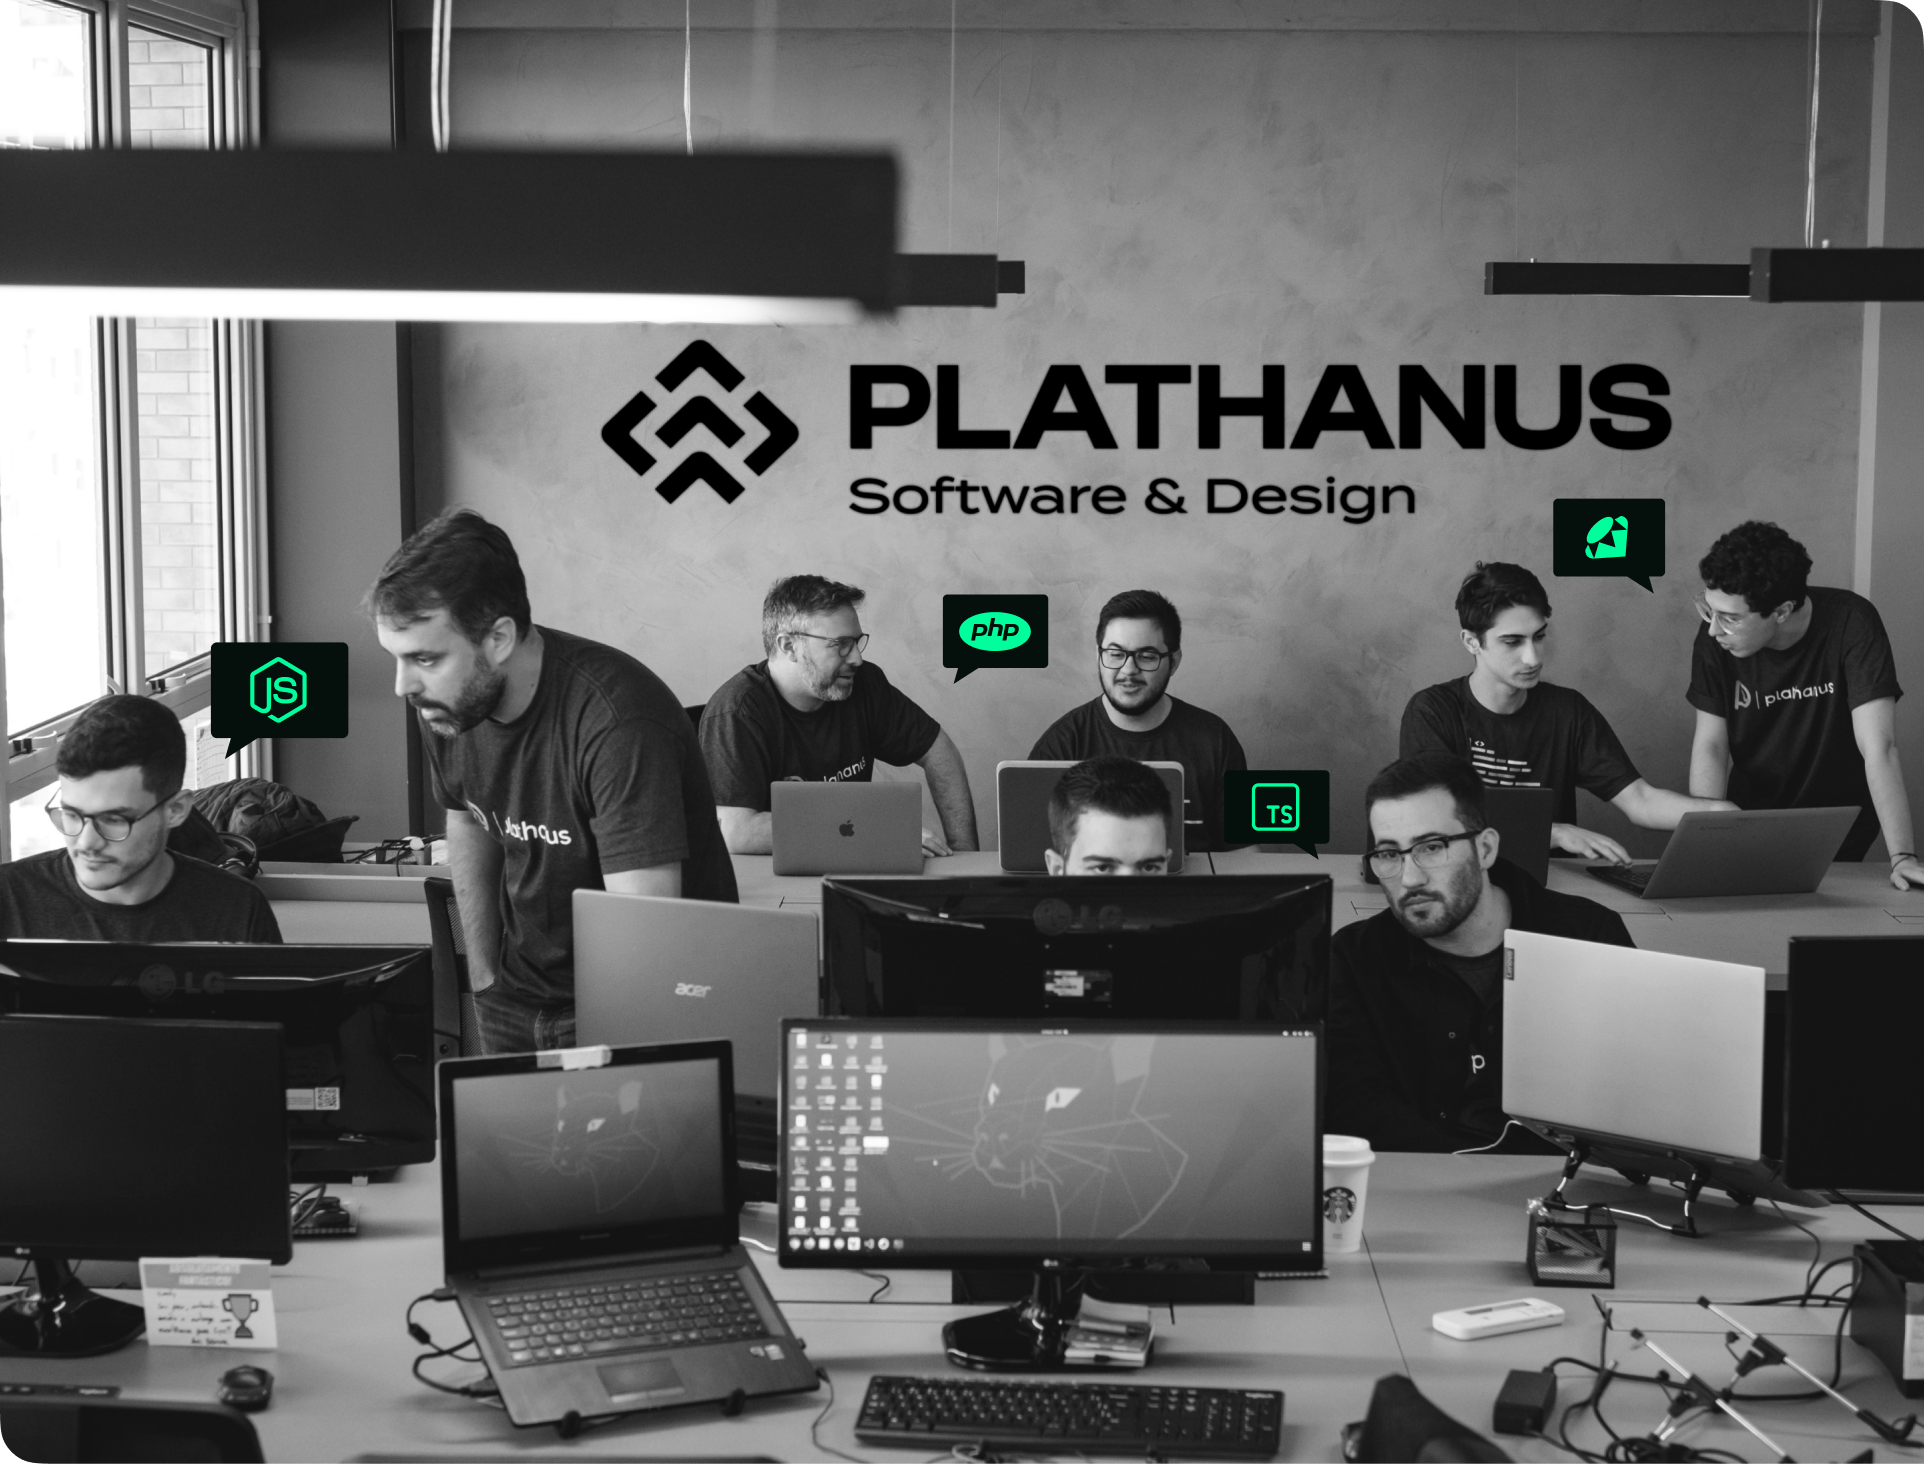 In the Plathanus office, a photo captures the dynamic interaction between eight team members.